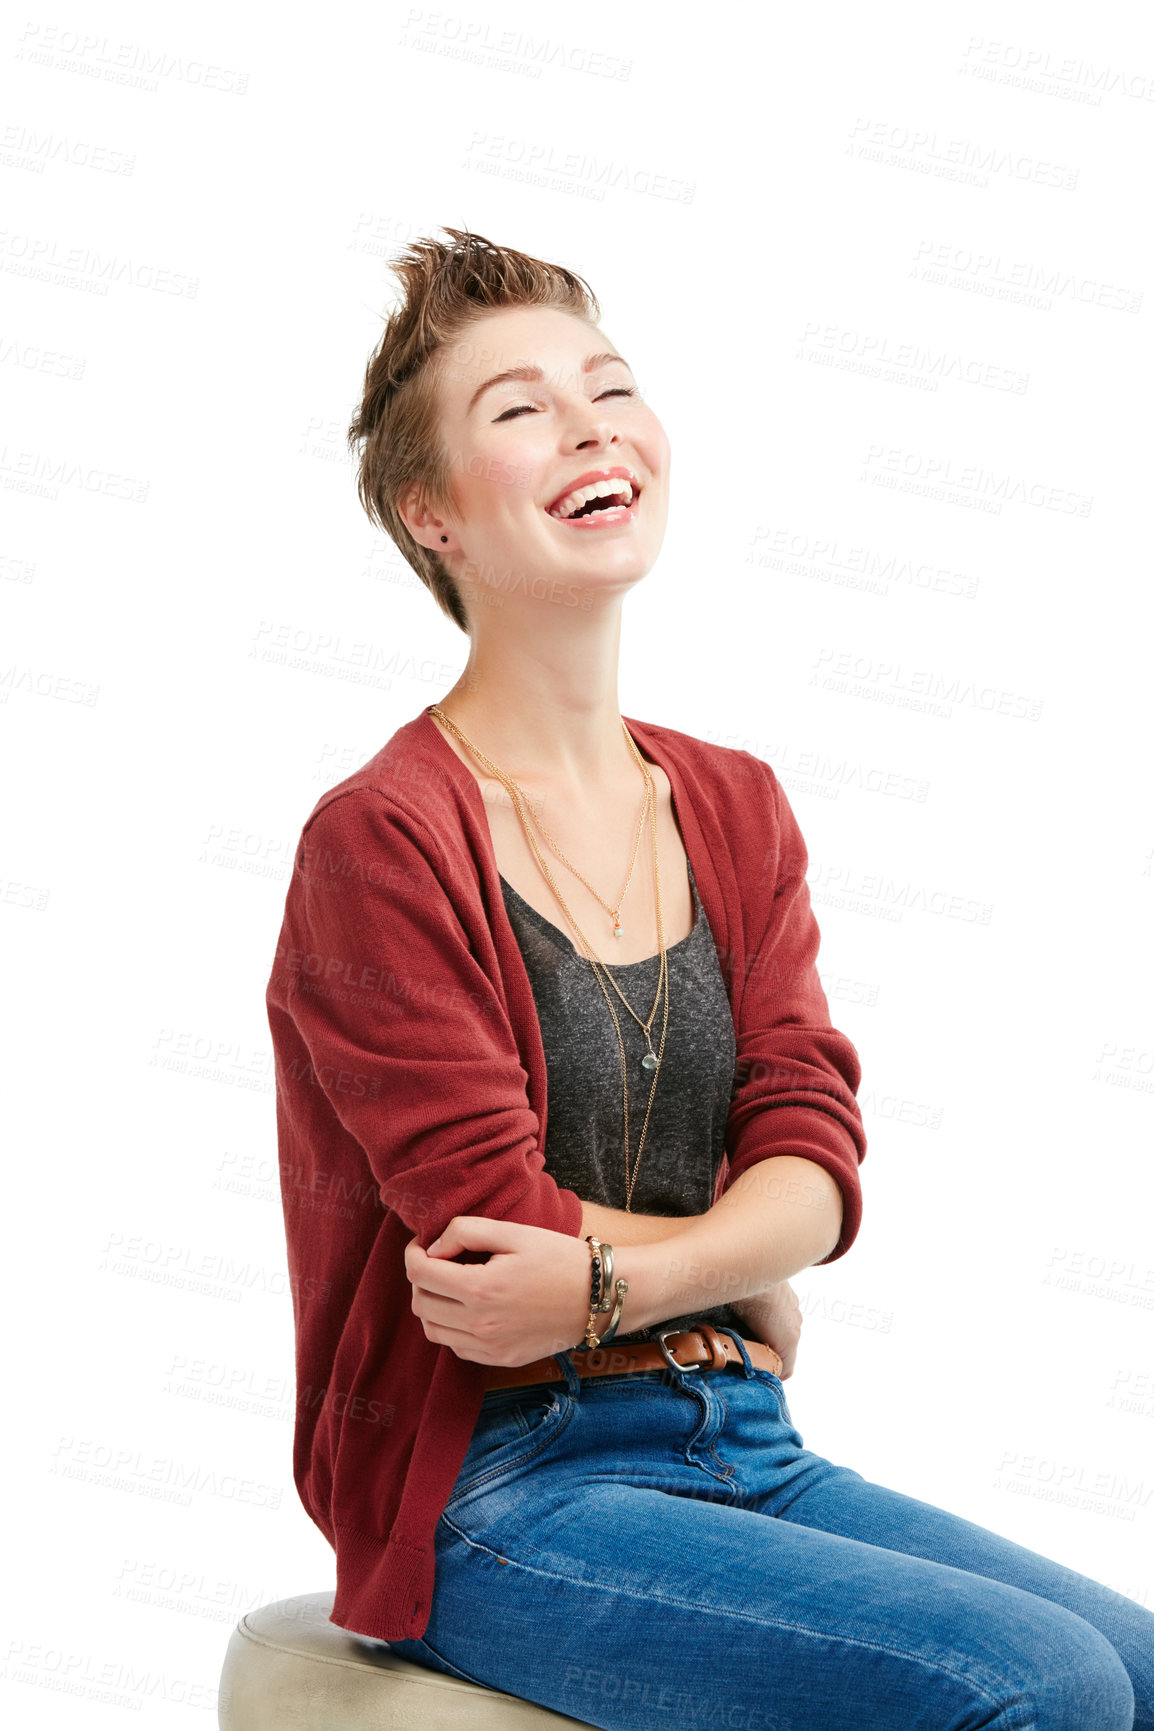 Buy stock photo Studio portrait of a joyful young woman sitting on a chair against a white background